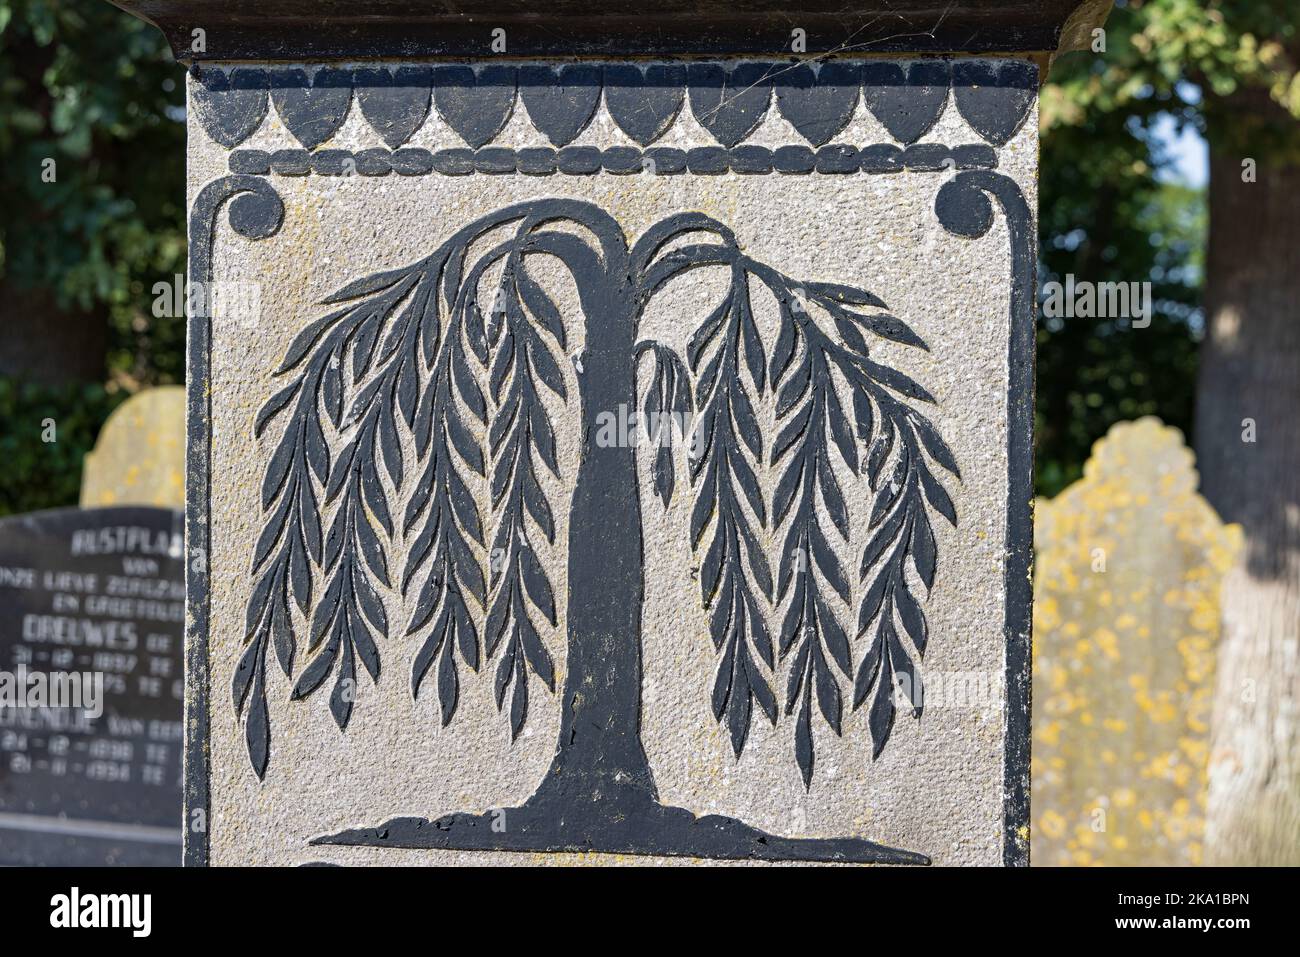 Marum, The Netherlands - September 2, 2022: Old grave with tree of life or weeping willow symbol at graveyard in Marum in municipality Westerkwartier in Groningen province the Netherlands Stock Photo